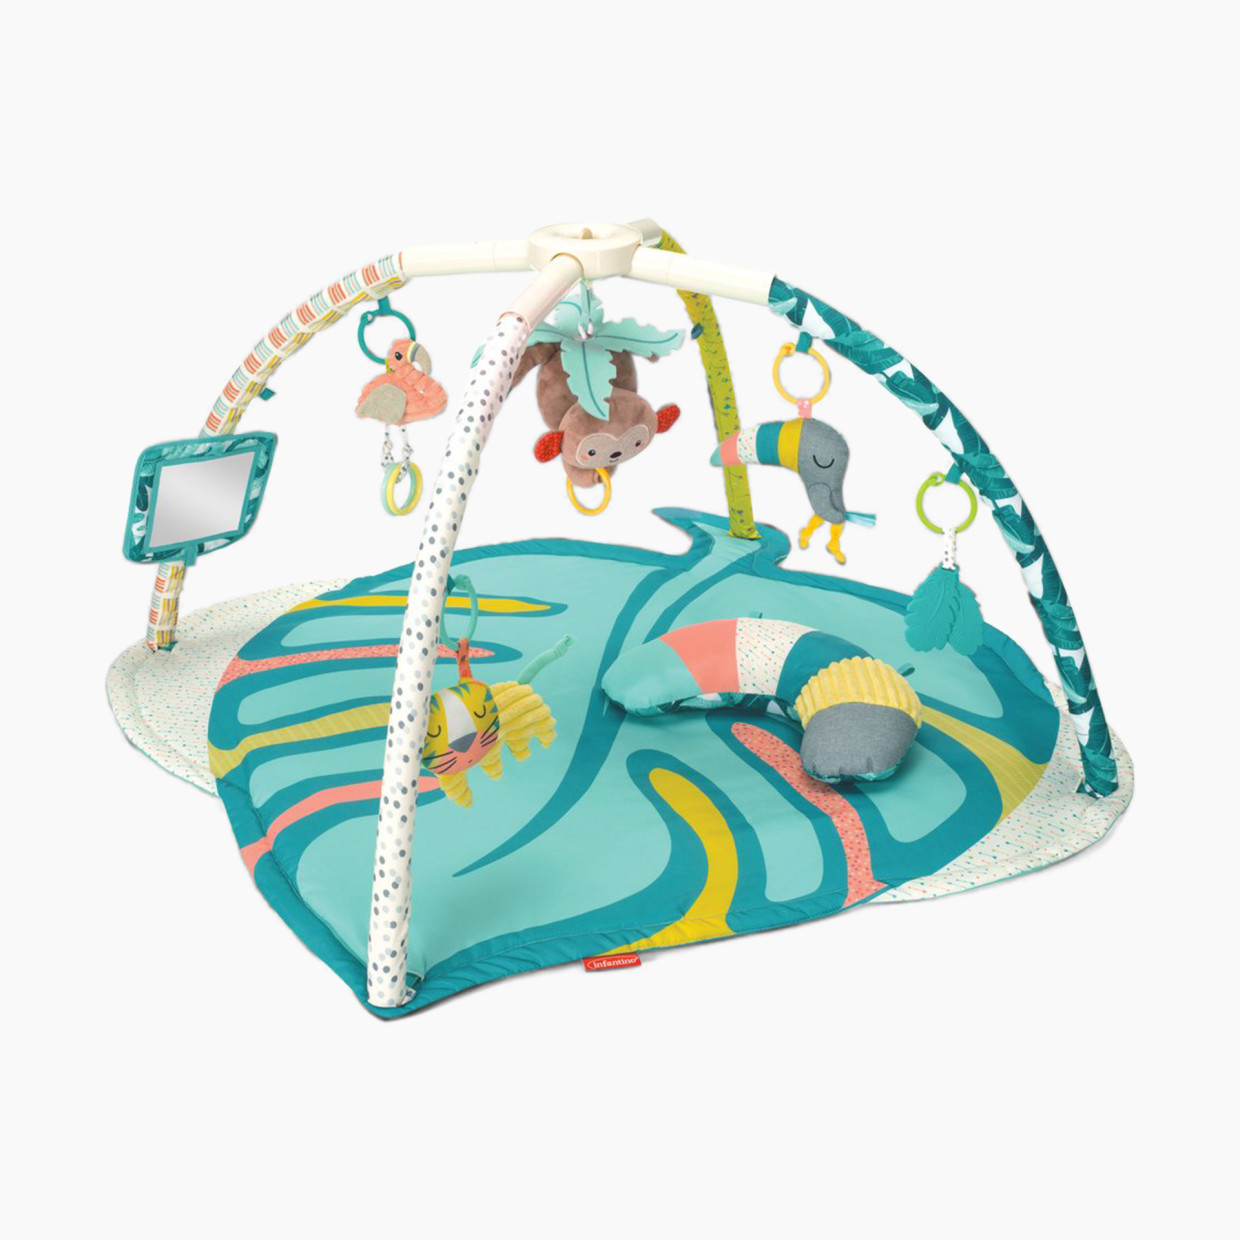 Infantino 4-in-1 Deluxe Twist & Fold Activity Gym & Play Mat - Tropical.